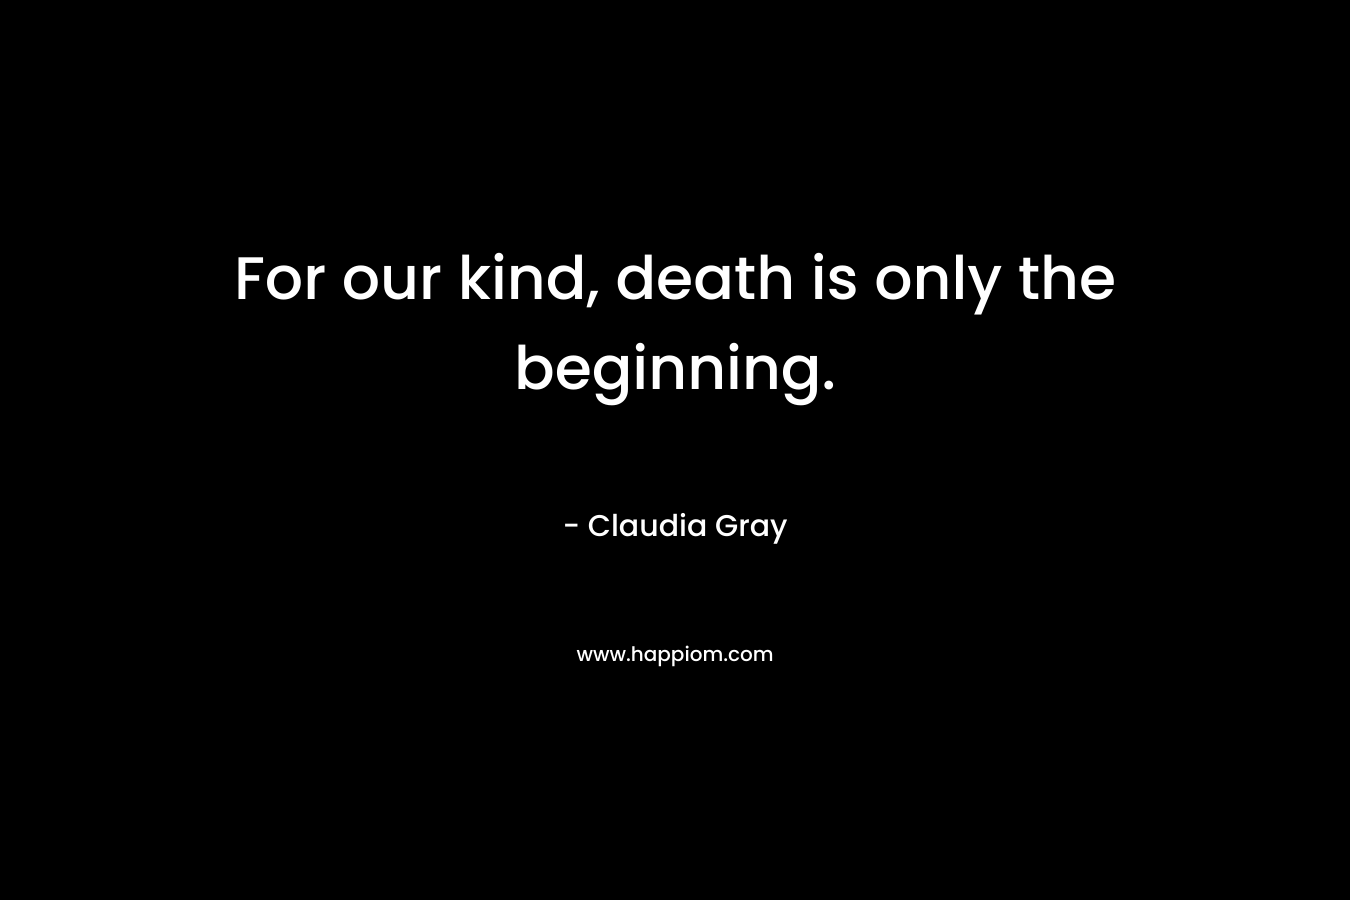 For our kind, death is only the beginning. – Claudia Gray